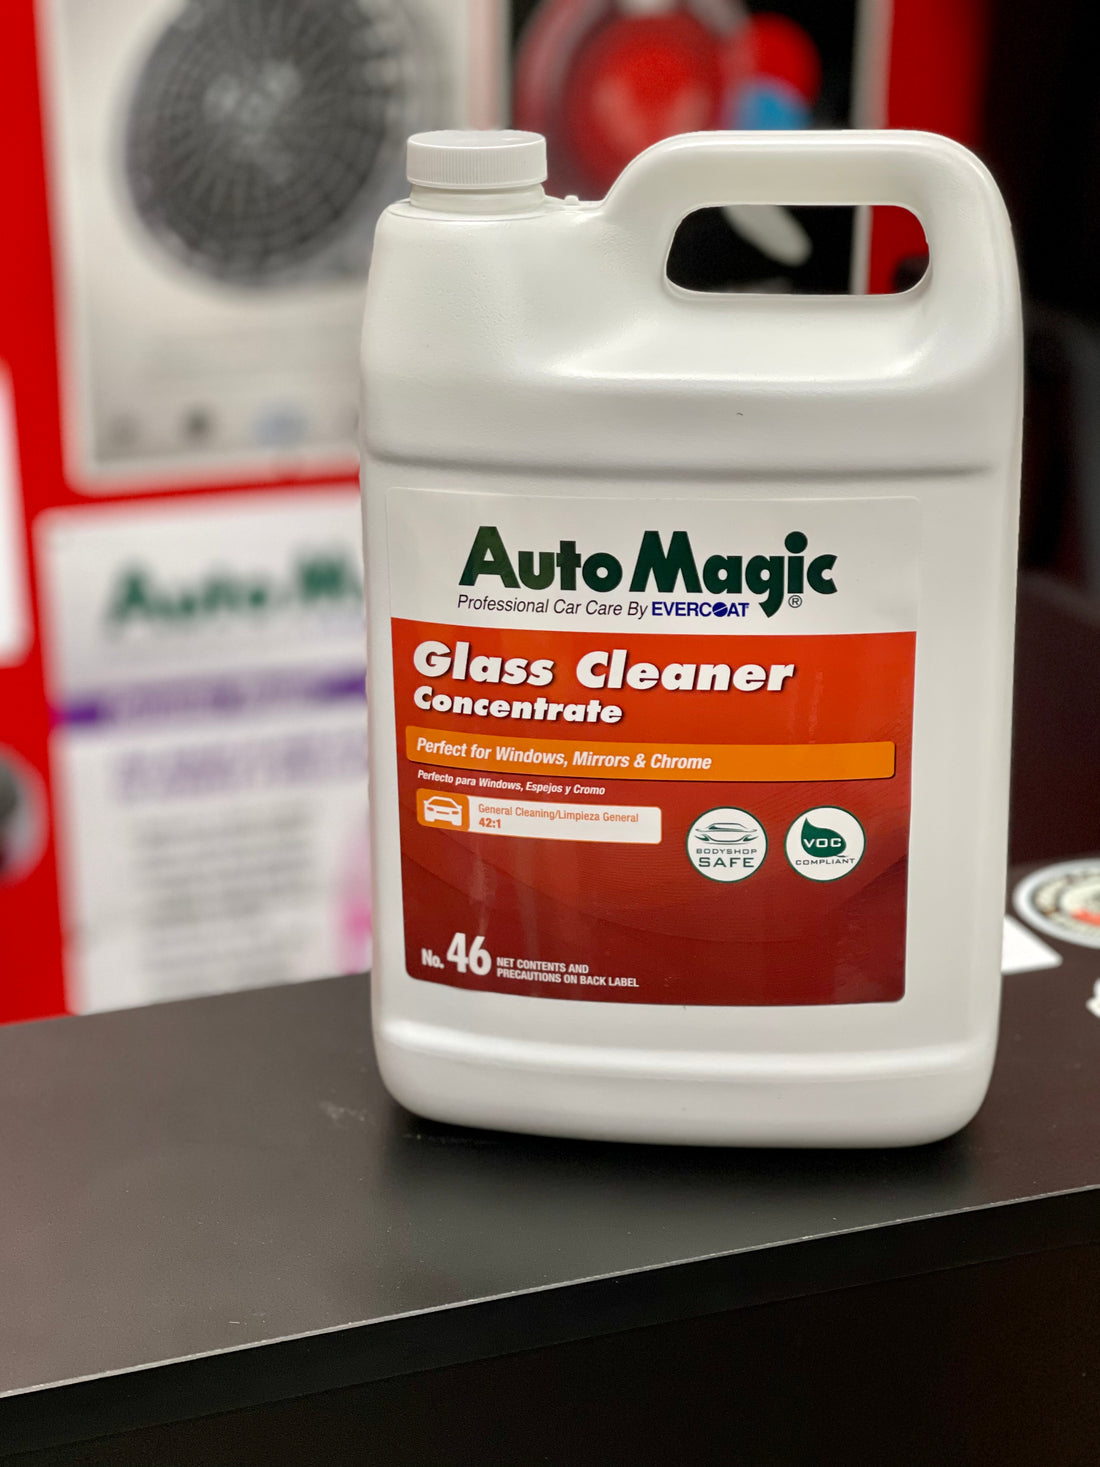 AutoMagic Glass Cleaner Con. 1 Gal